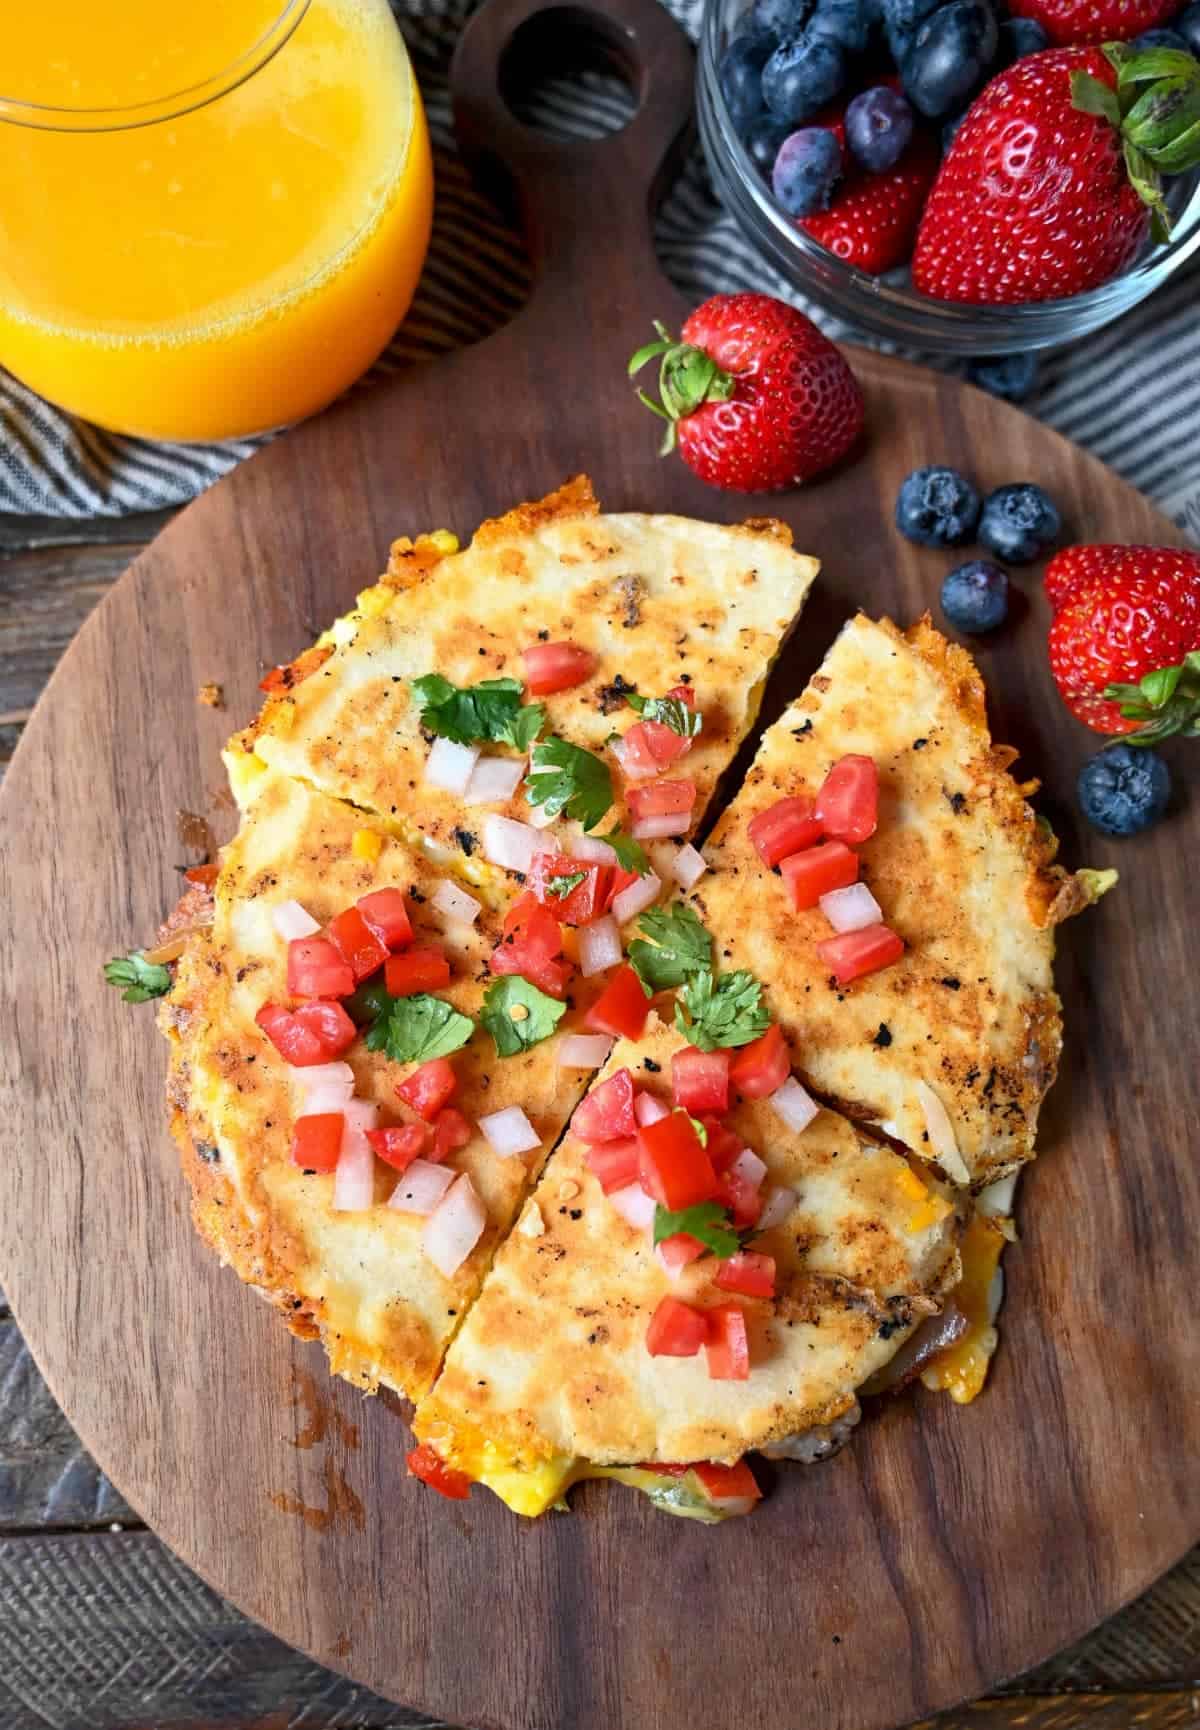 Breakfast quesadilla cut into fourths on a cutting board with a side of strawberries, blueberries and orange juice.